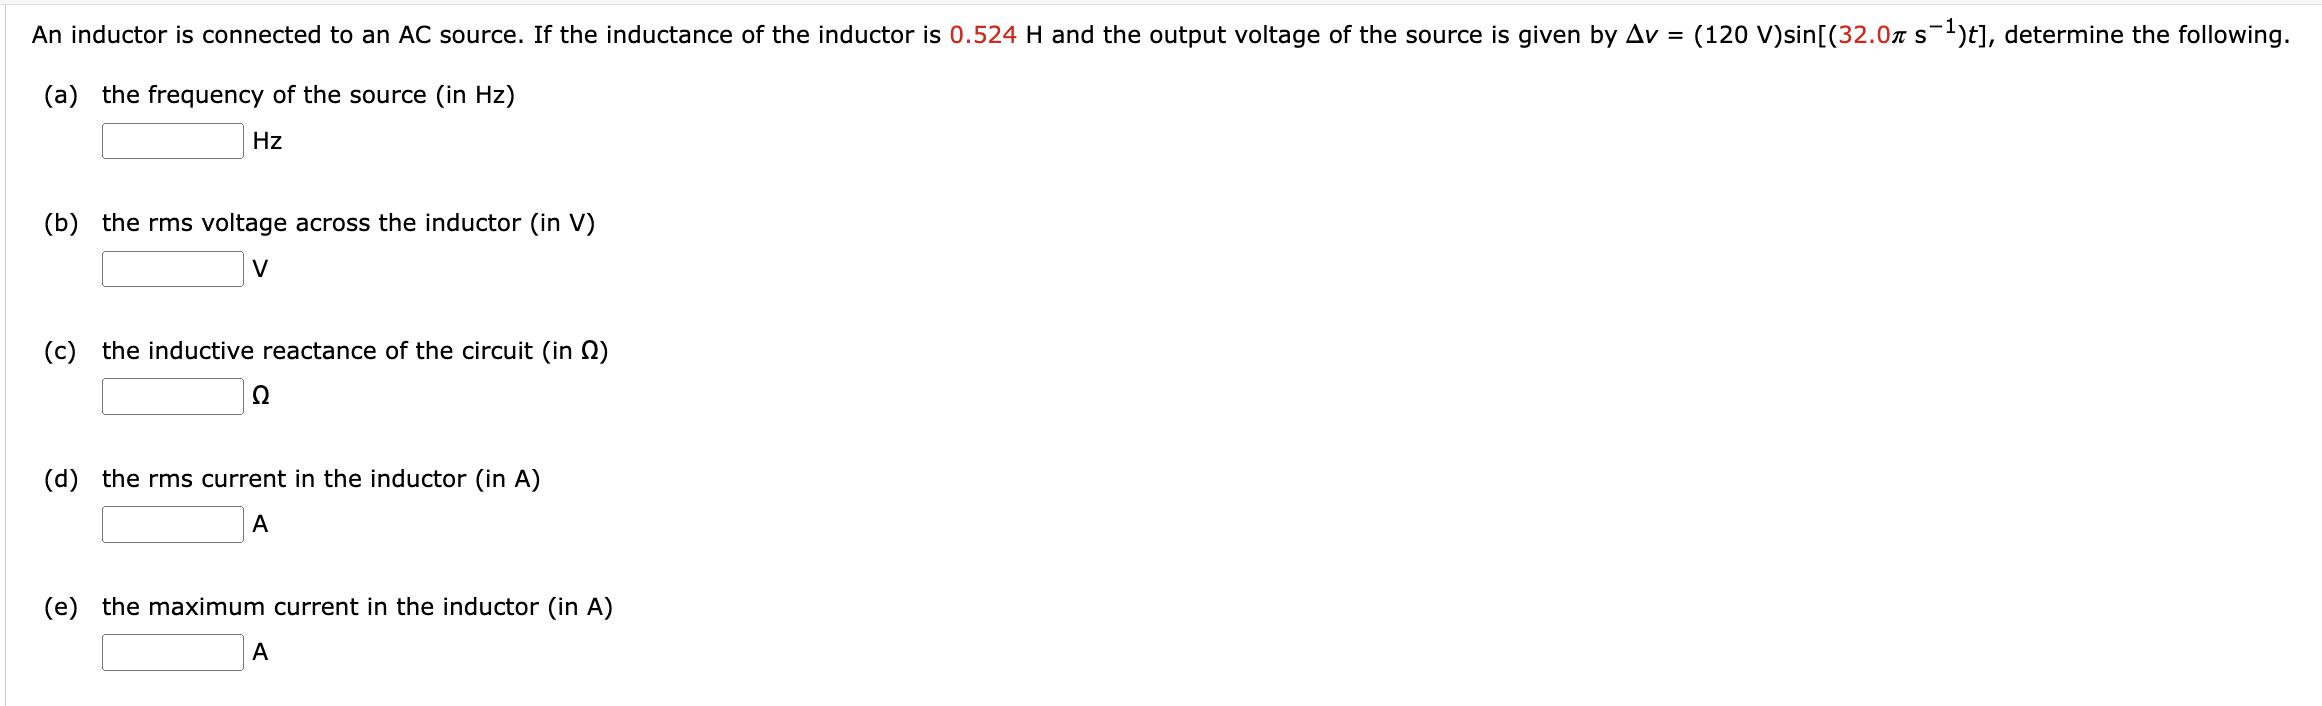 An inductor is connected to an AC source. If the inductance of the inductor is 0.524 H and the output voltage